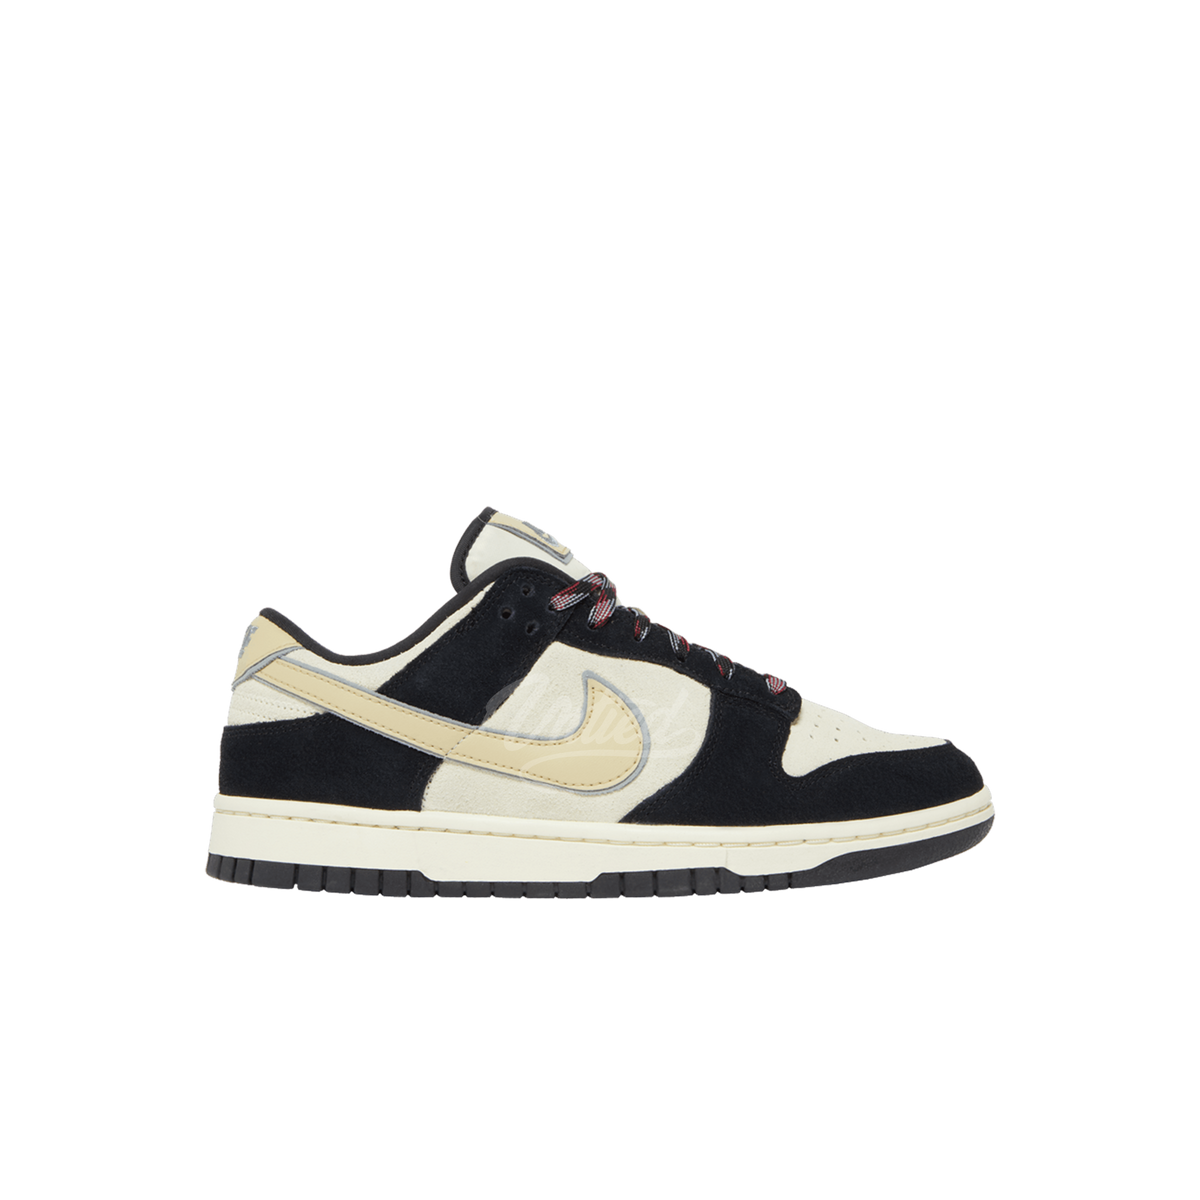 Nike Dunk Low "Black Suede/Team Gold" (W)